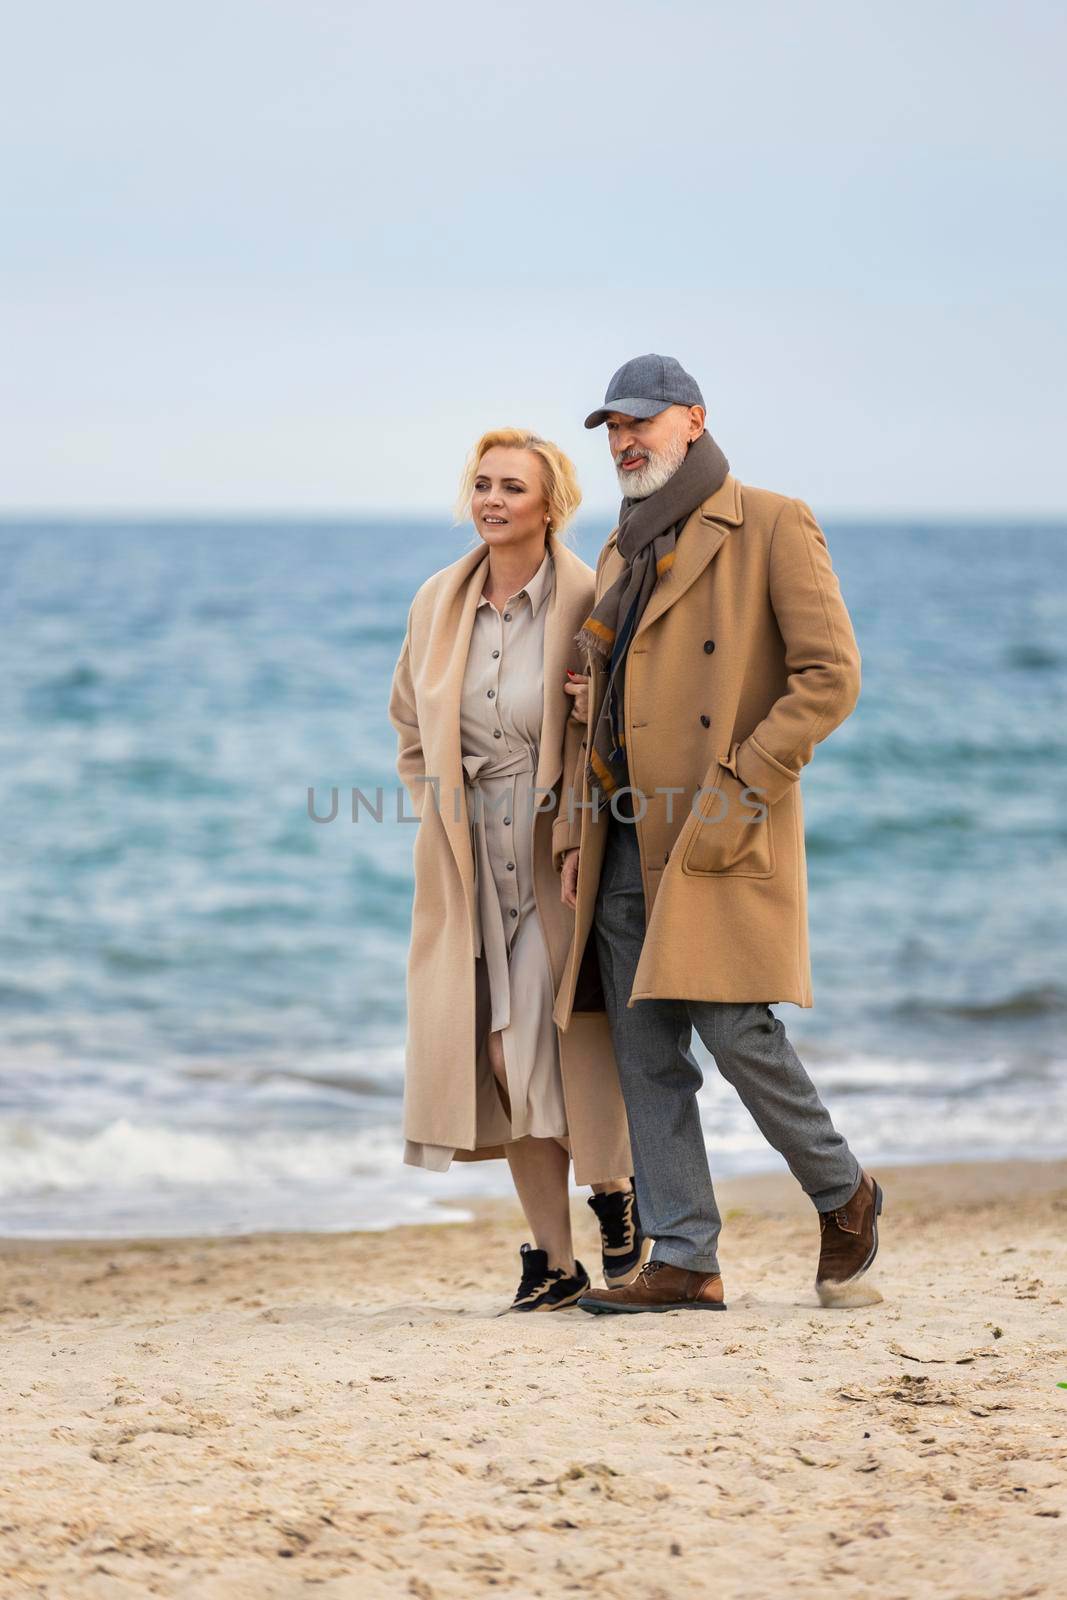 aged couple walking by the sea by zokov